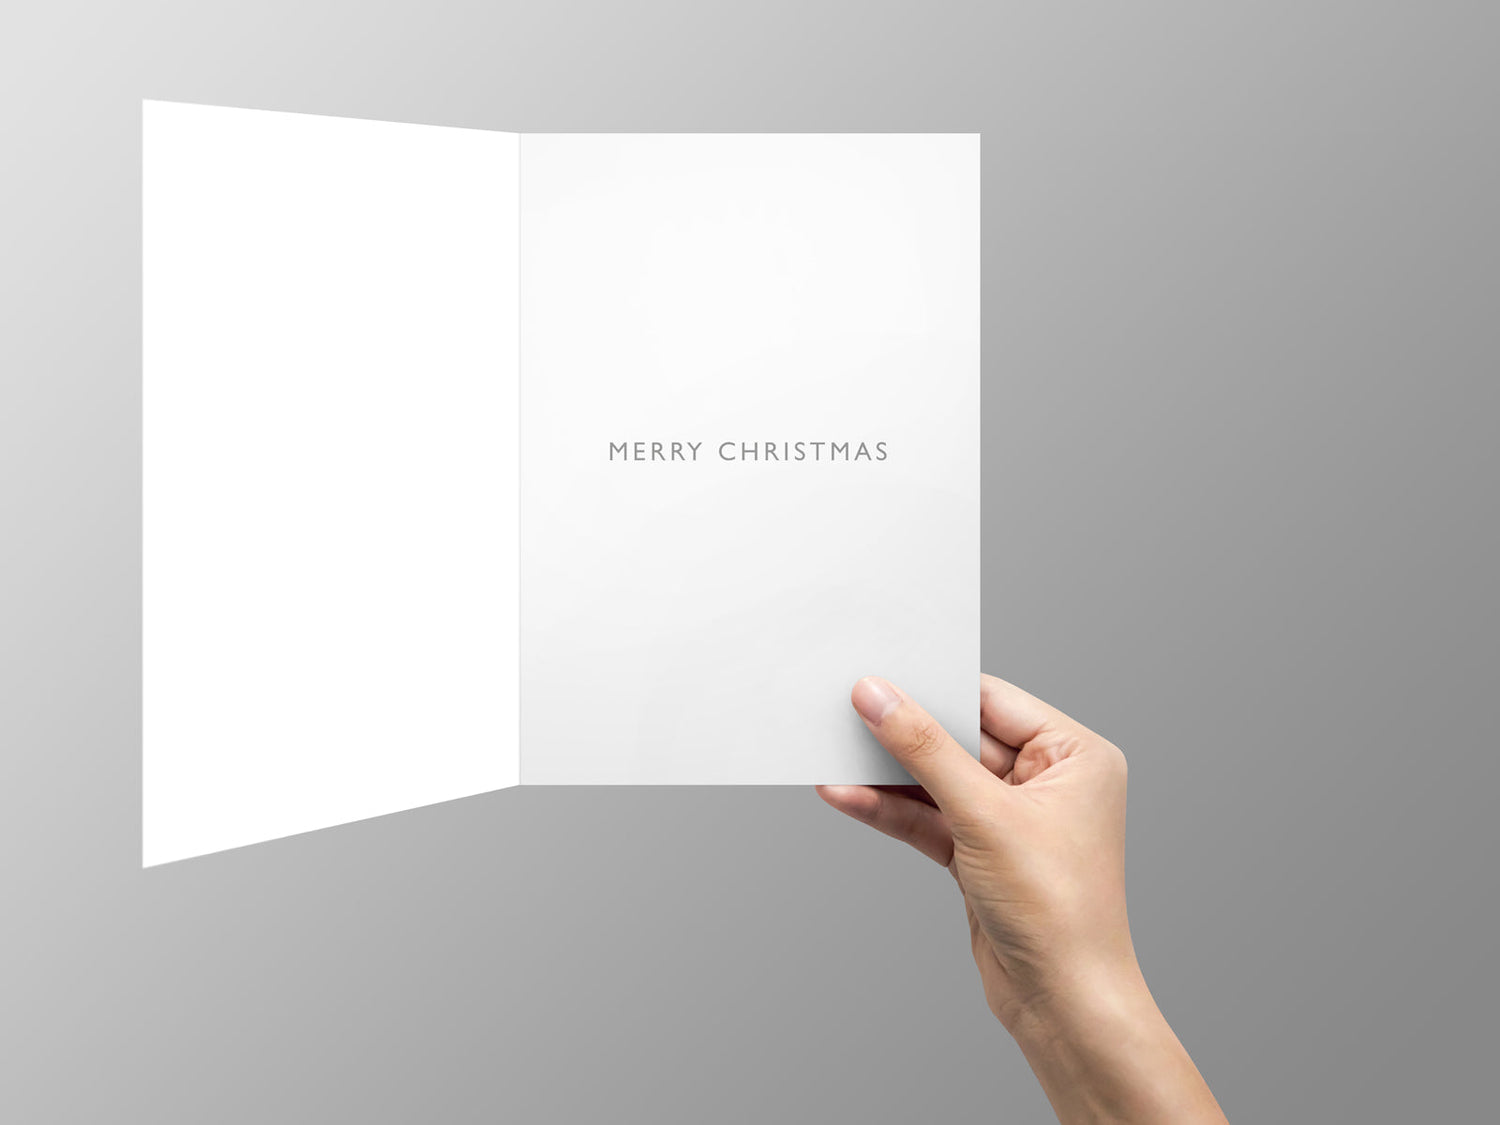 Merry Christmas message in Xmas card